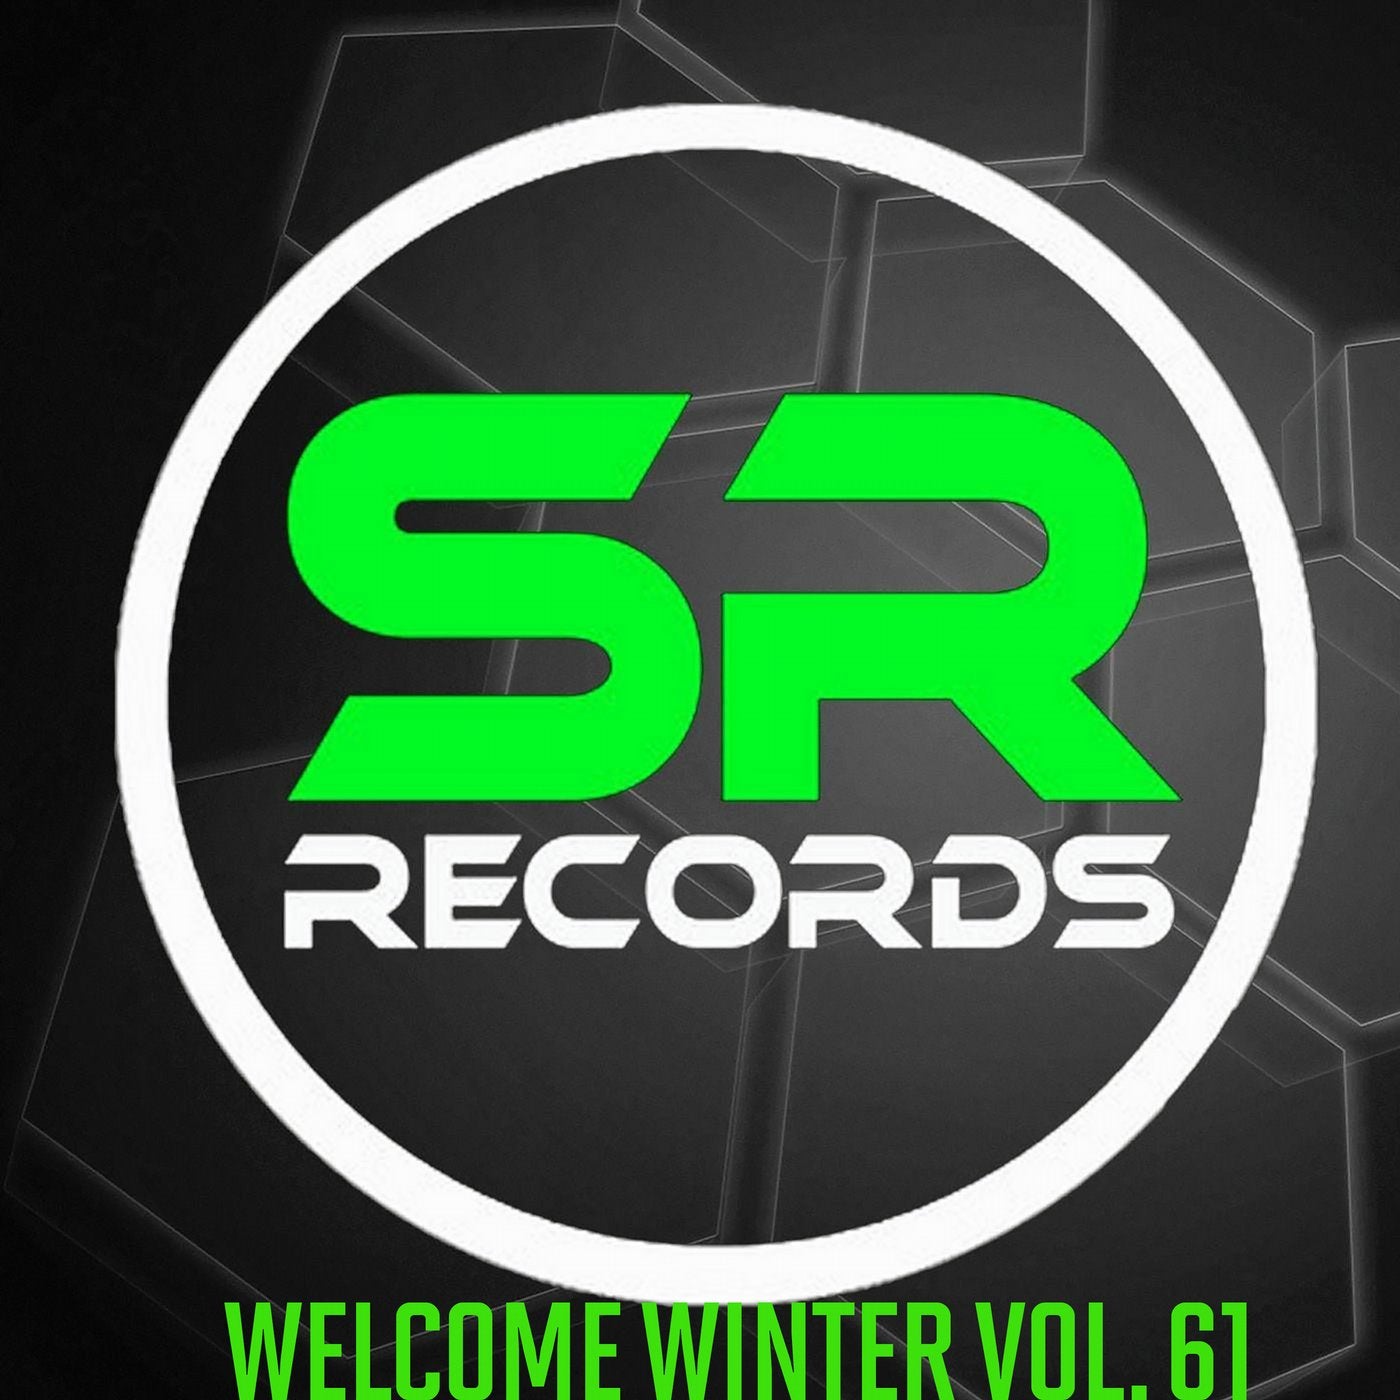 Welcome to Winter Vol. 61